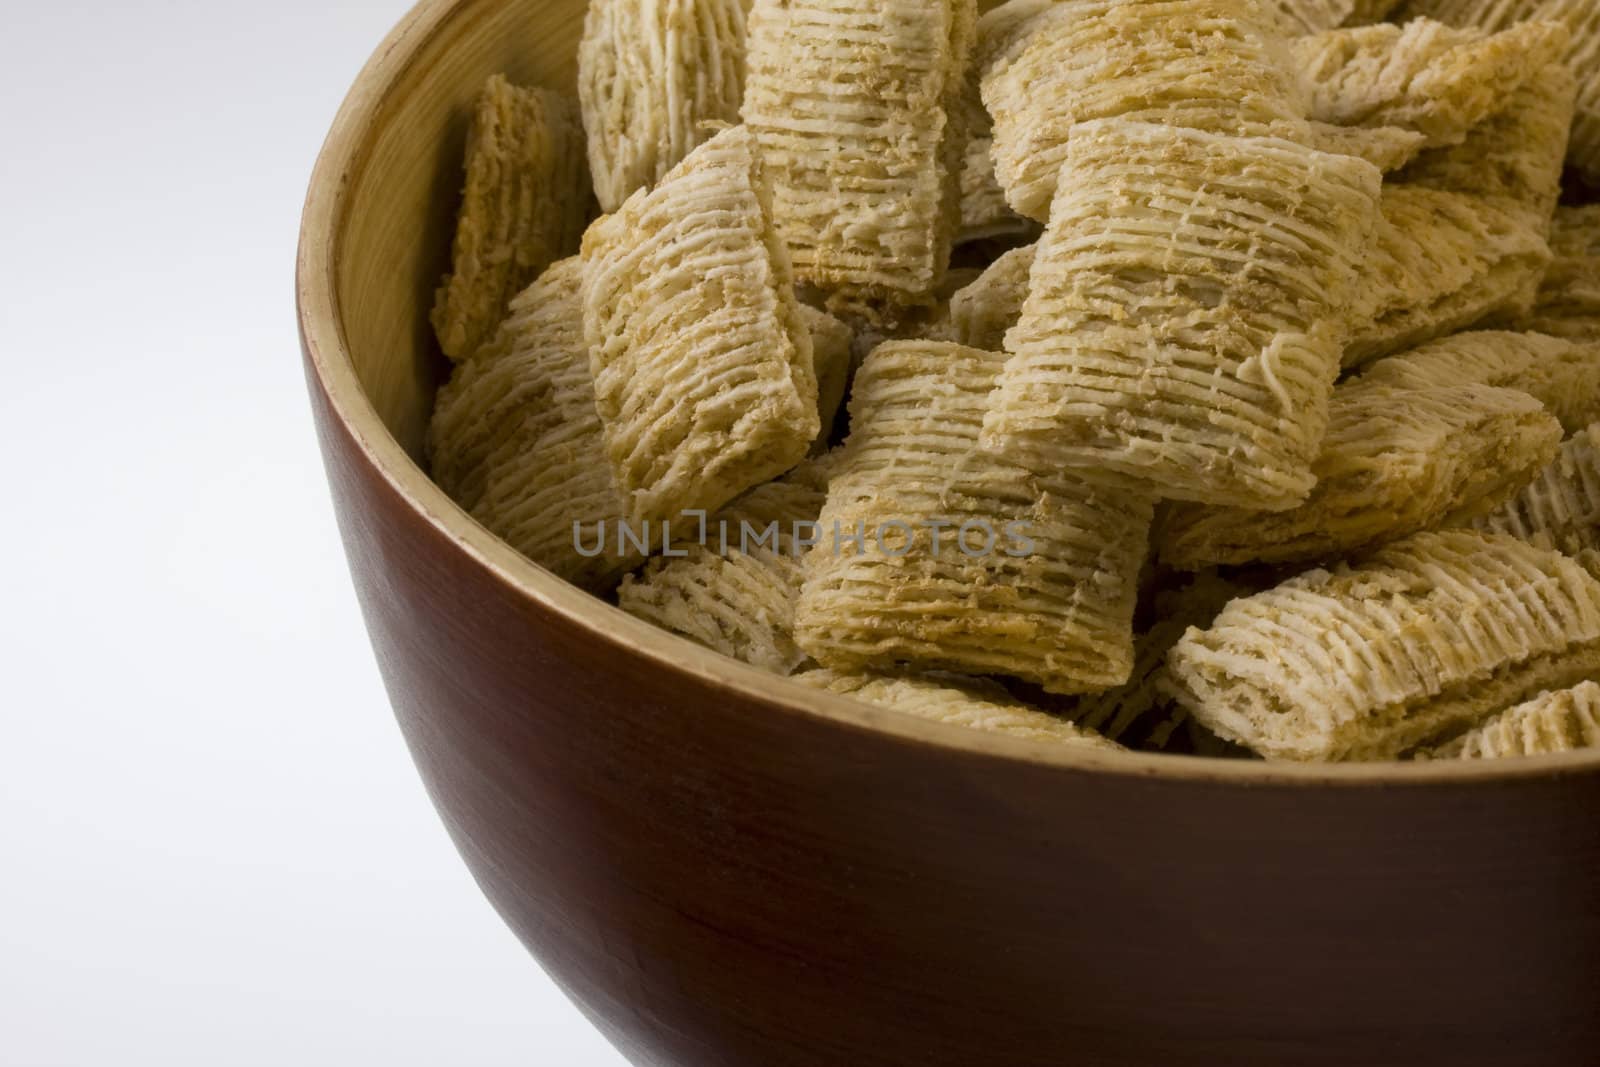 bowl of shredded wheat cereal by PixelsAway